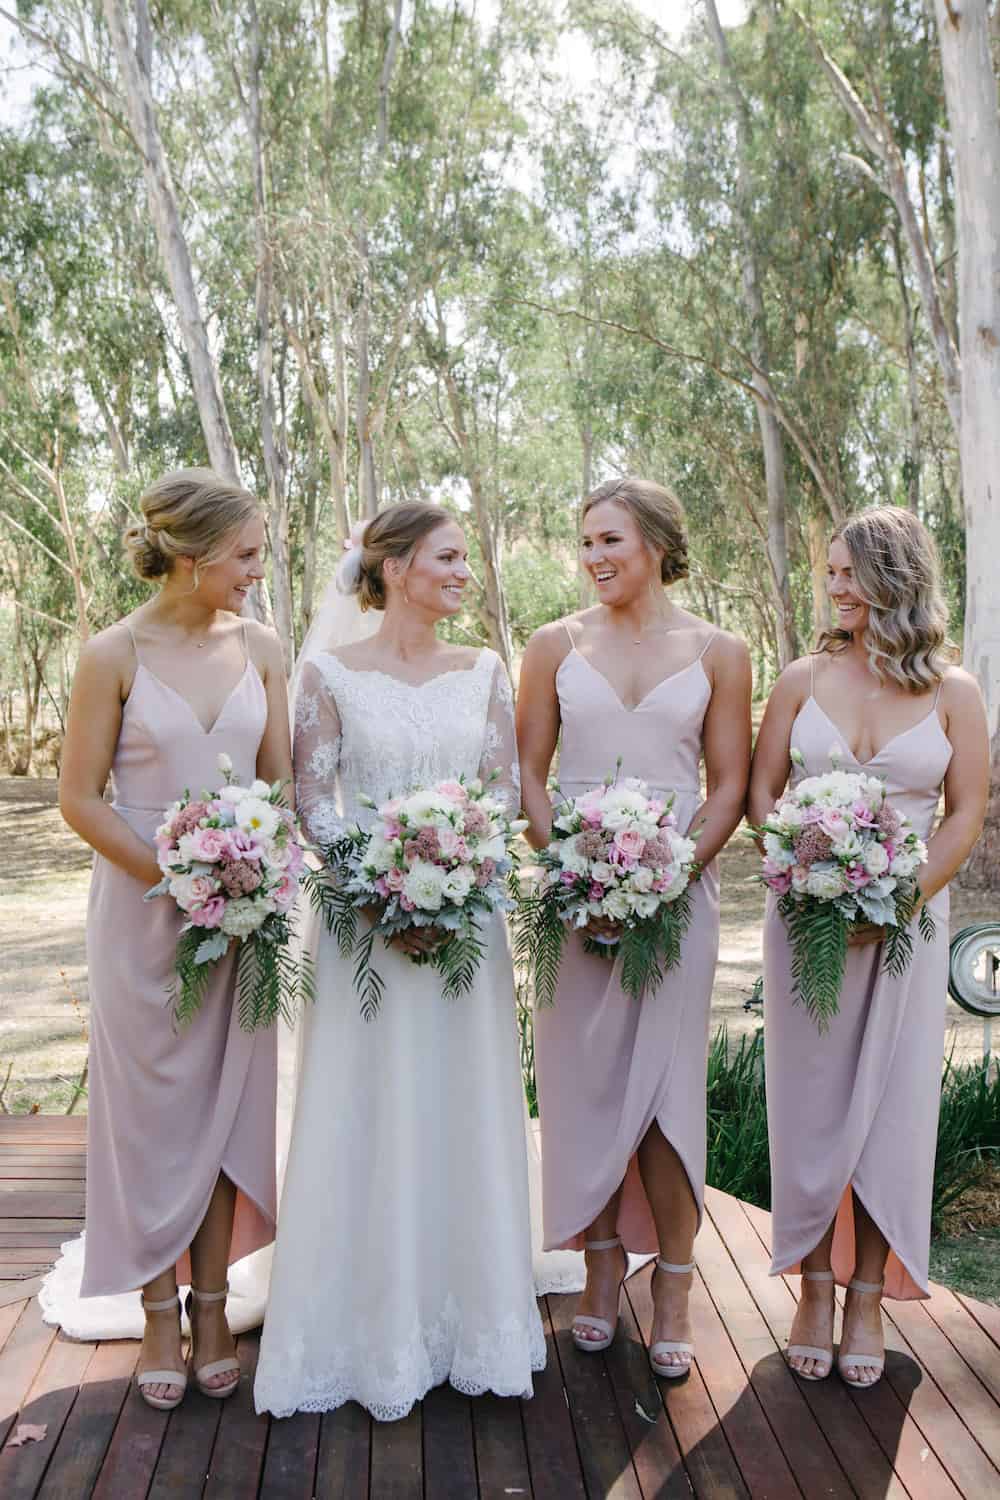 Gorgeous Barn Weddings Melbourne Killeen Station Mia and Brents Wedding Madeleine Chiller Photography 8